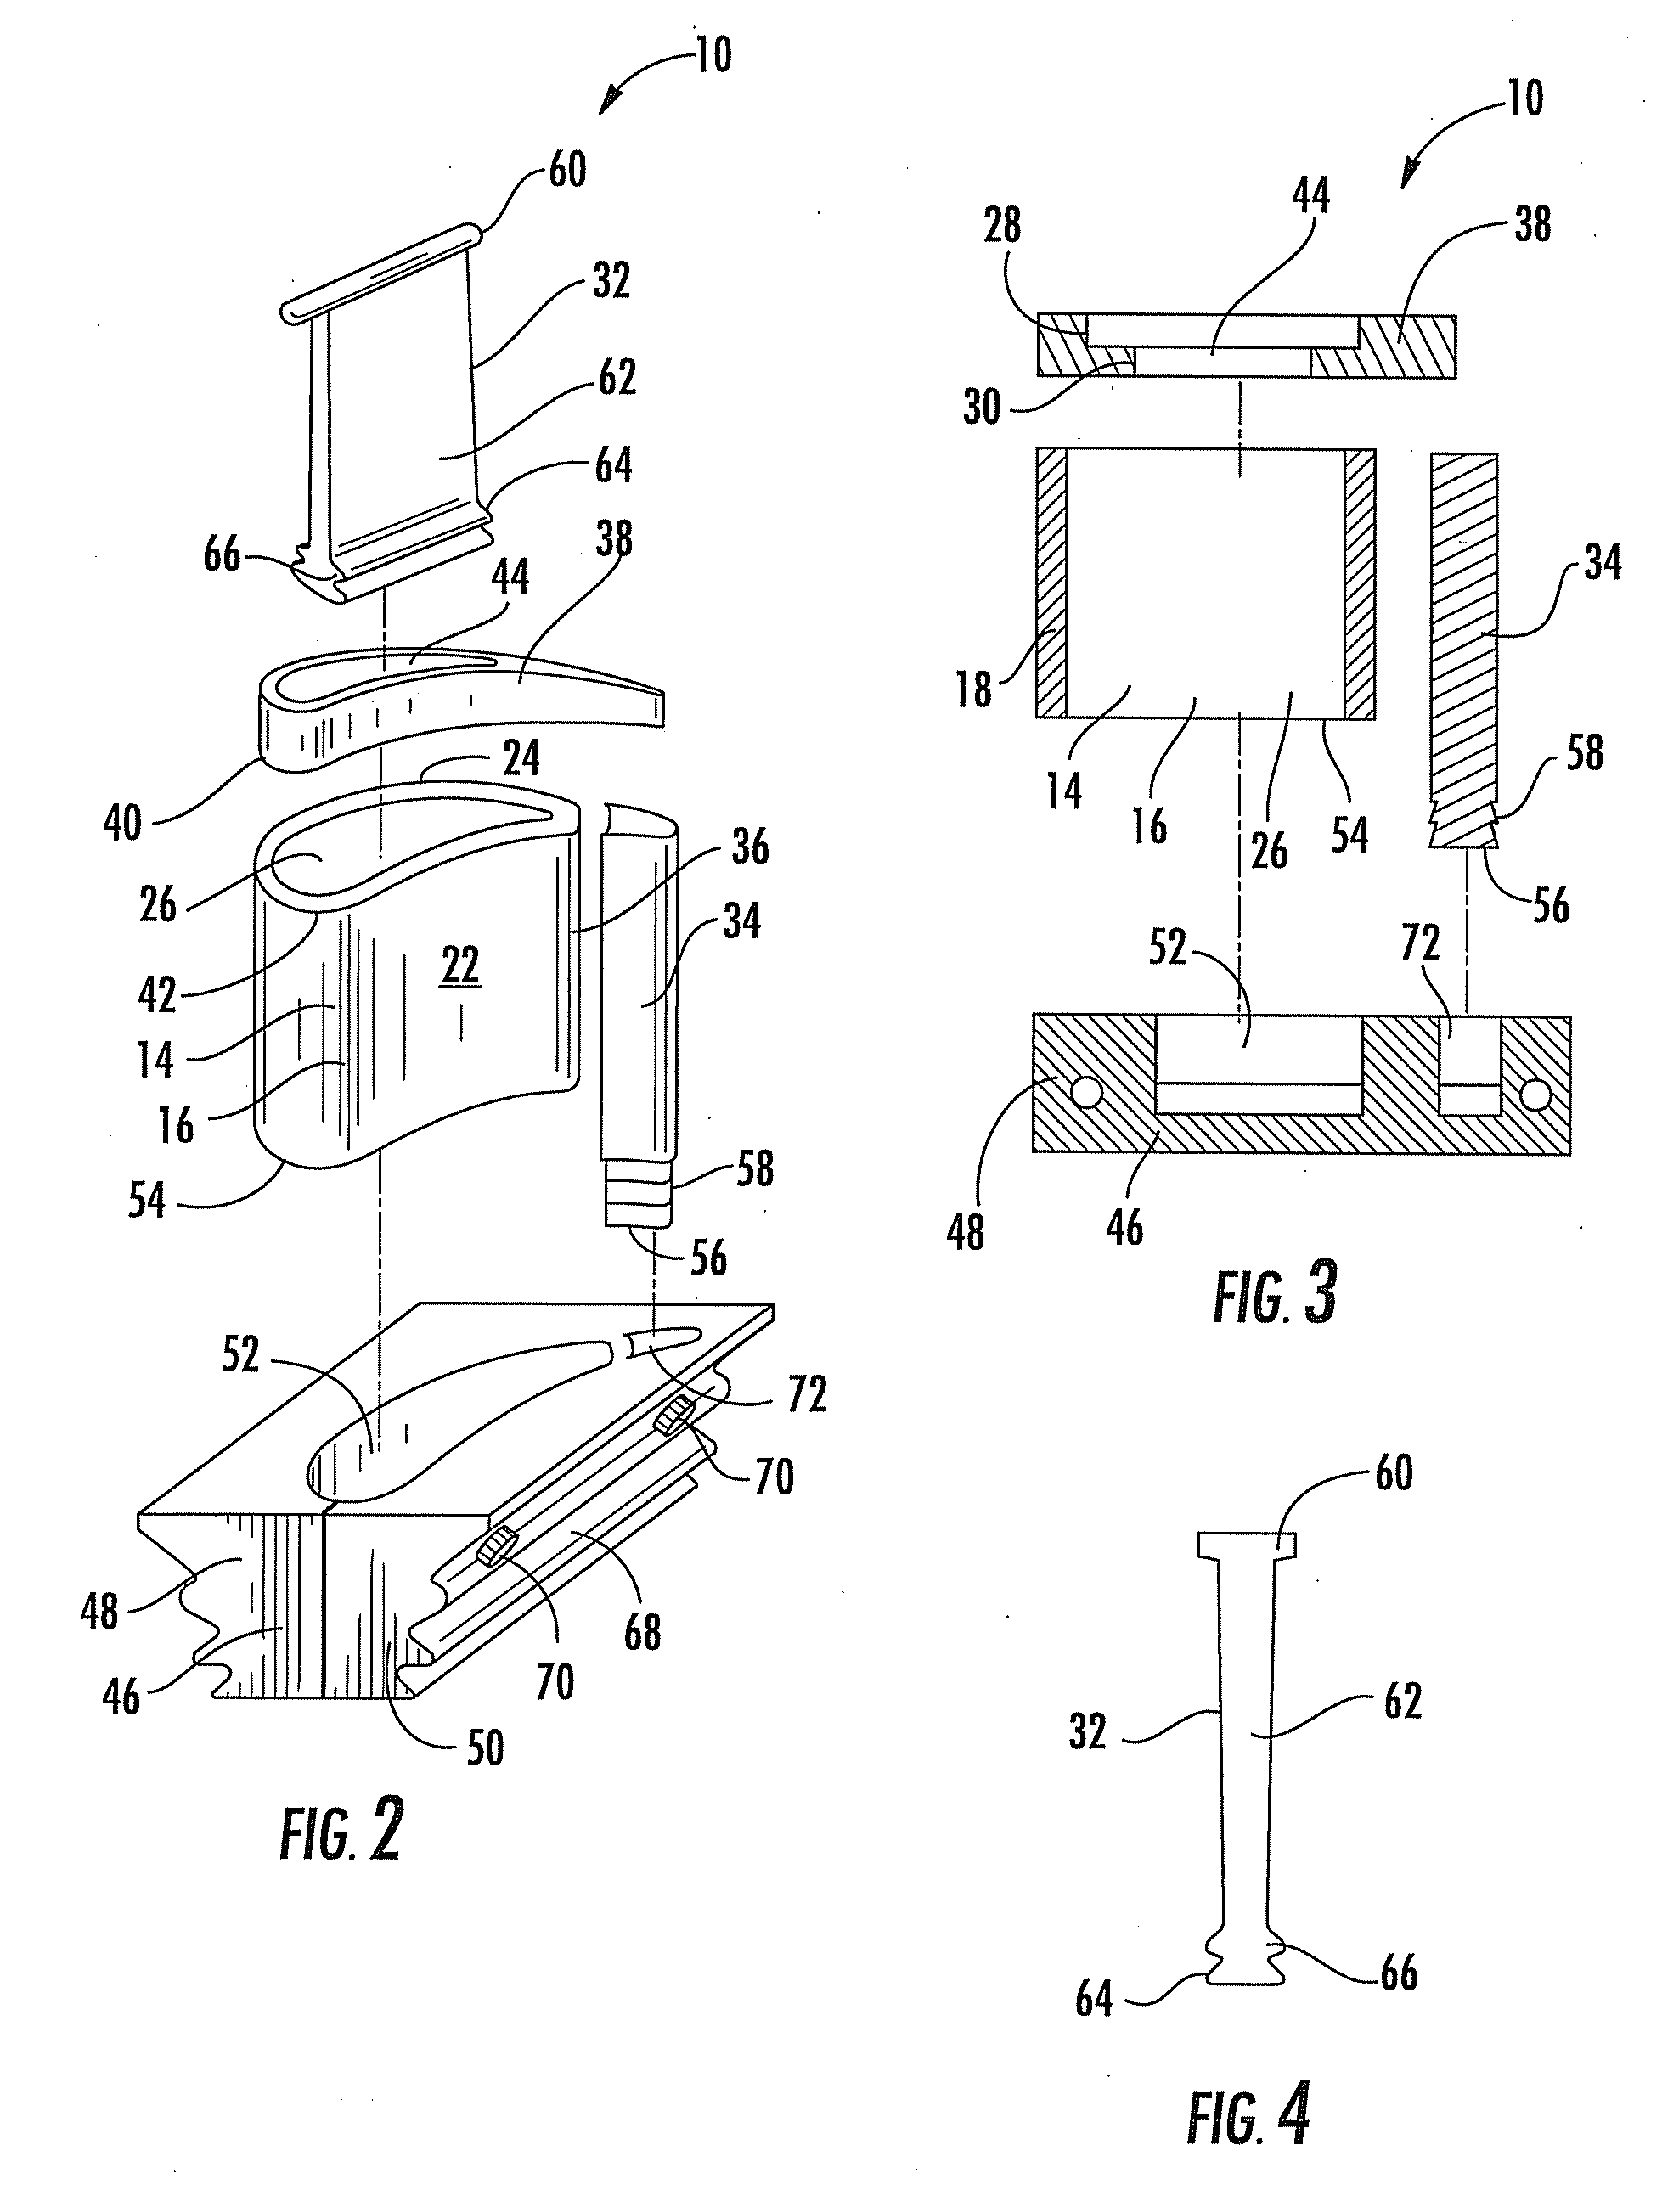 Multiple Piece Turbine Engine Airfoil with a Structural Spar